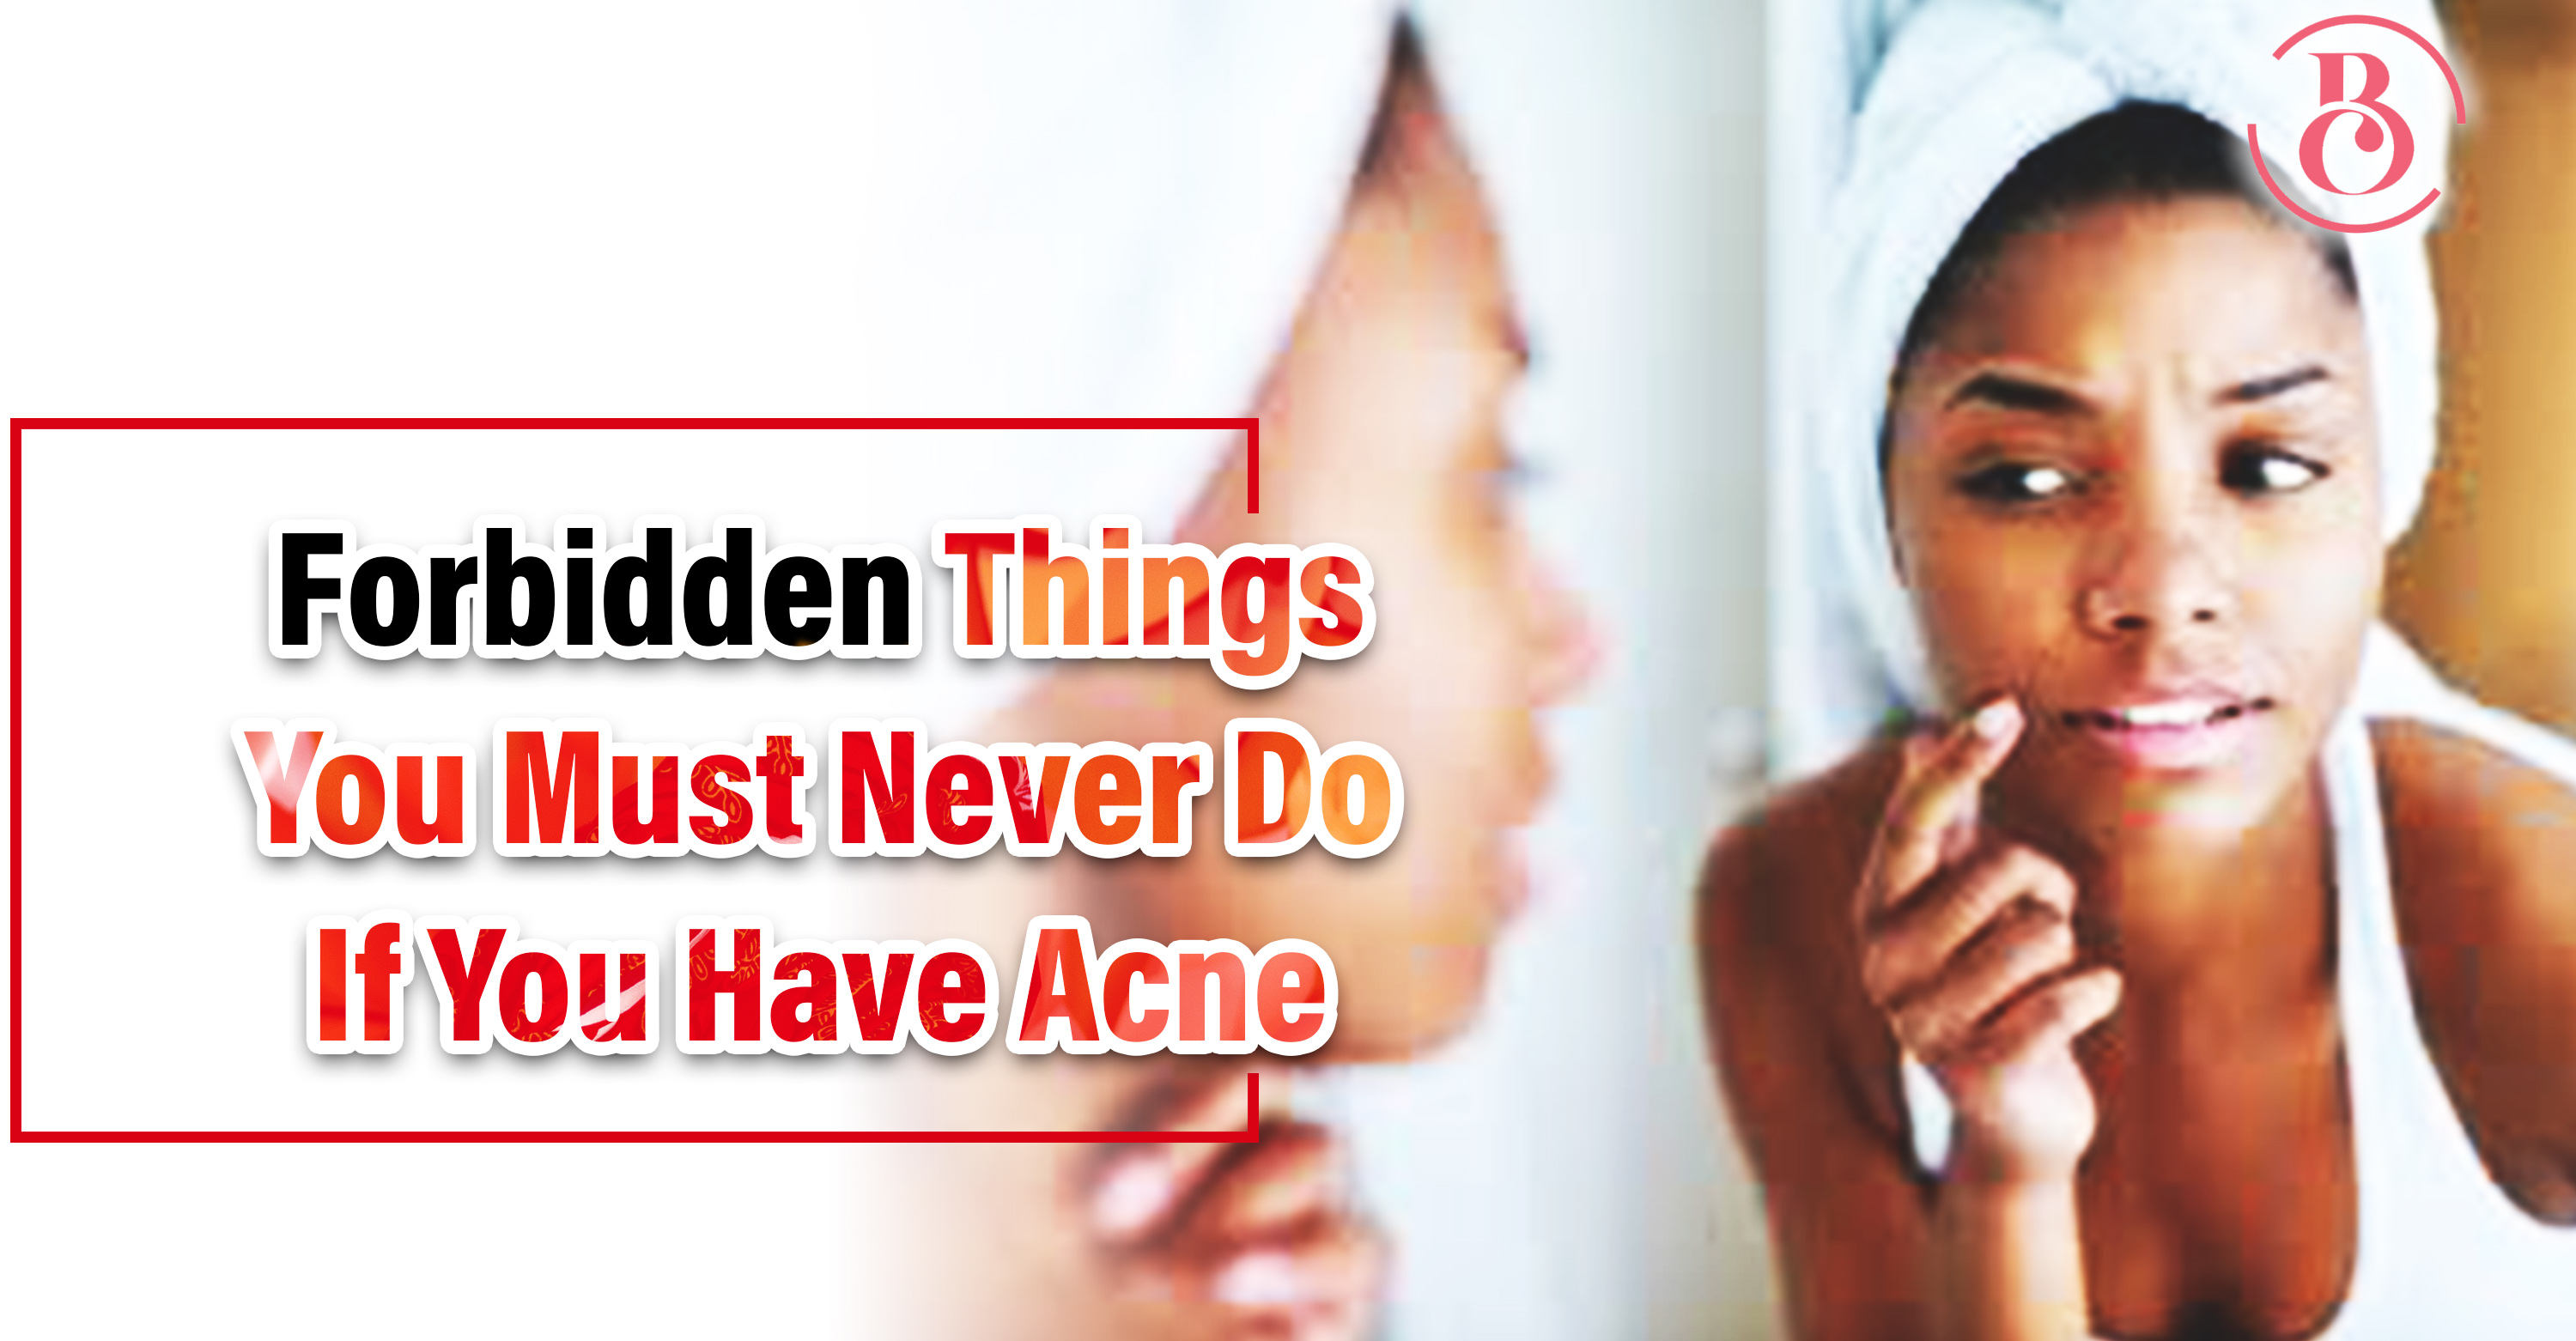 7 Forbidden Things You Must Never Do If You Have Acne